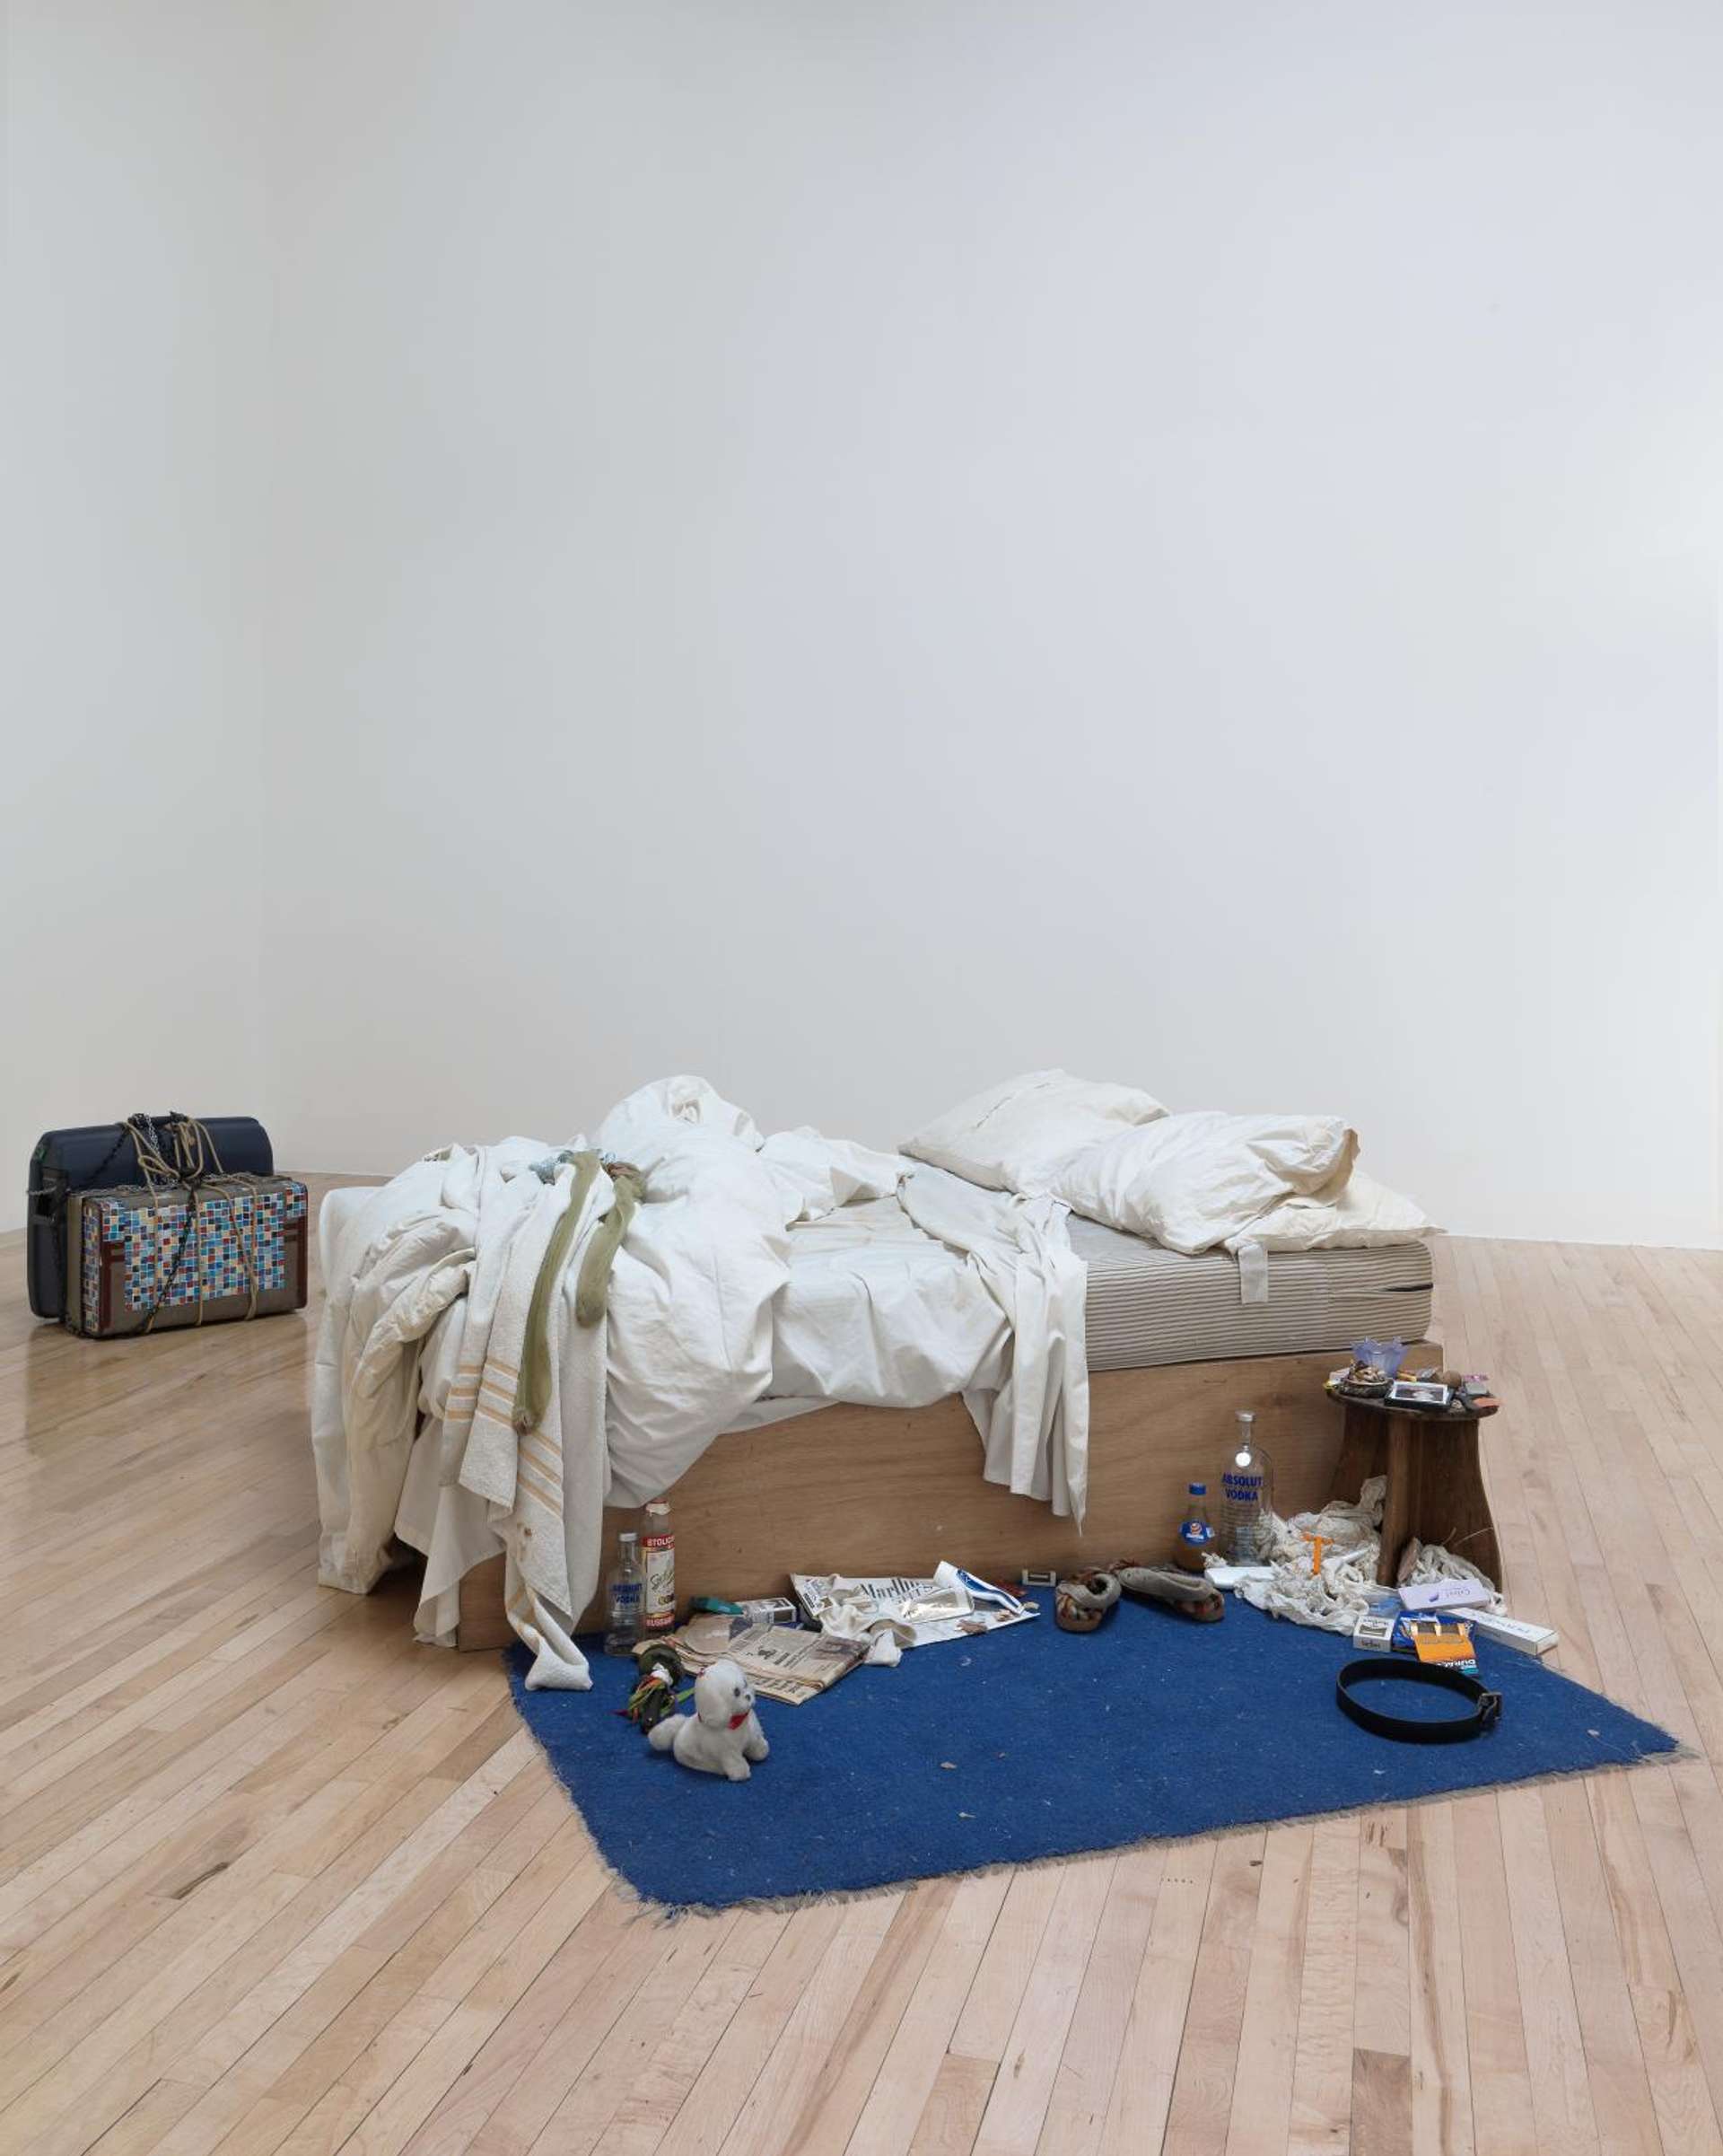 A photograph of Tracey Emin's installation, My Bed, an unmade bed with props littered around the scene